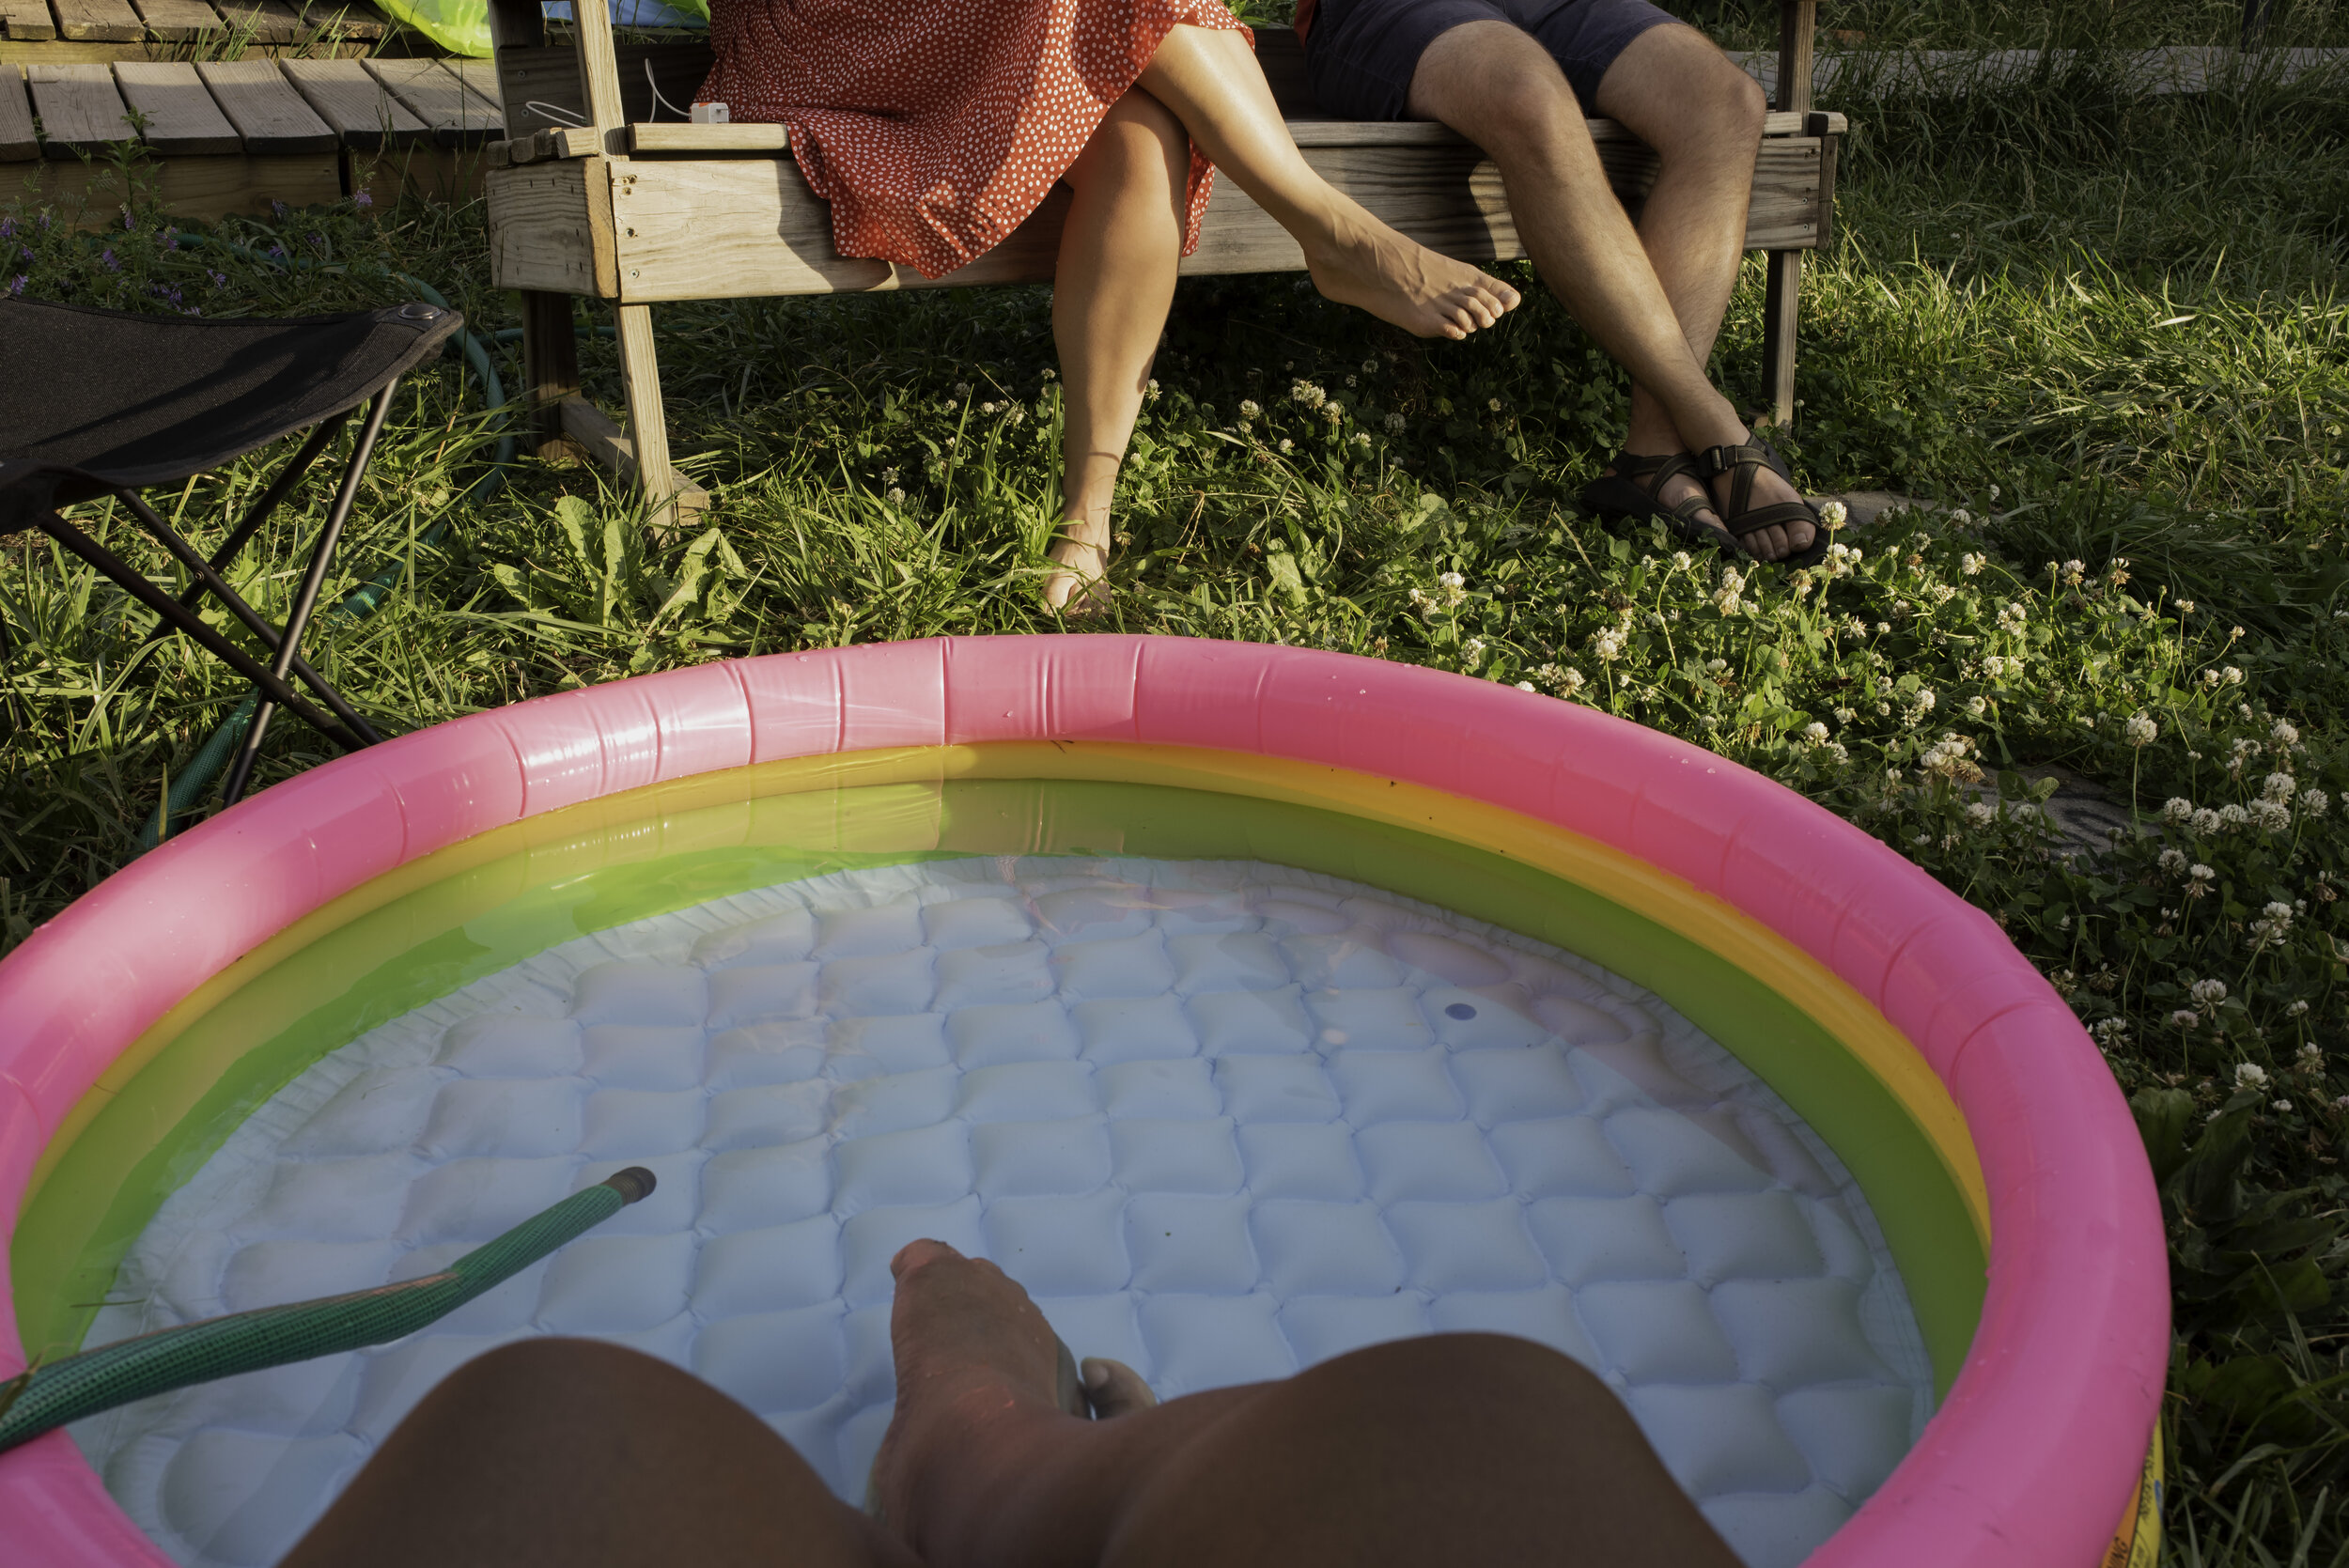   After months of being socially distanced from friends, dipping my feet in a mini pool in the backyard at the home that’s shared with my friend’s roommates felt greater than what I had anticipated. (Detroit, MI on Monday, June 22, 2020)  